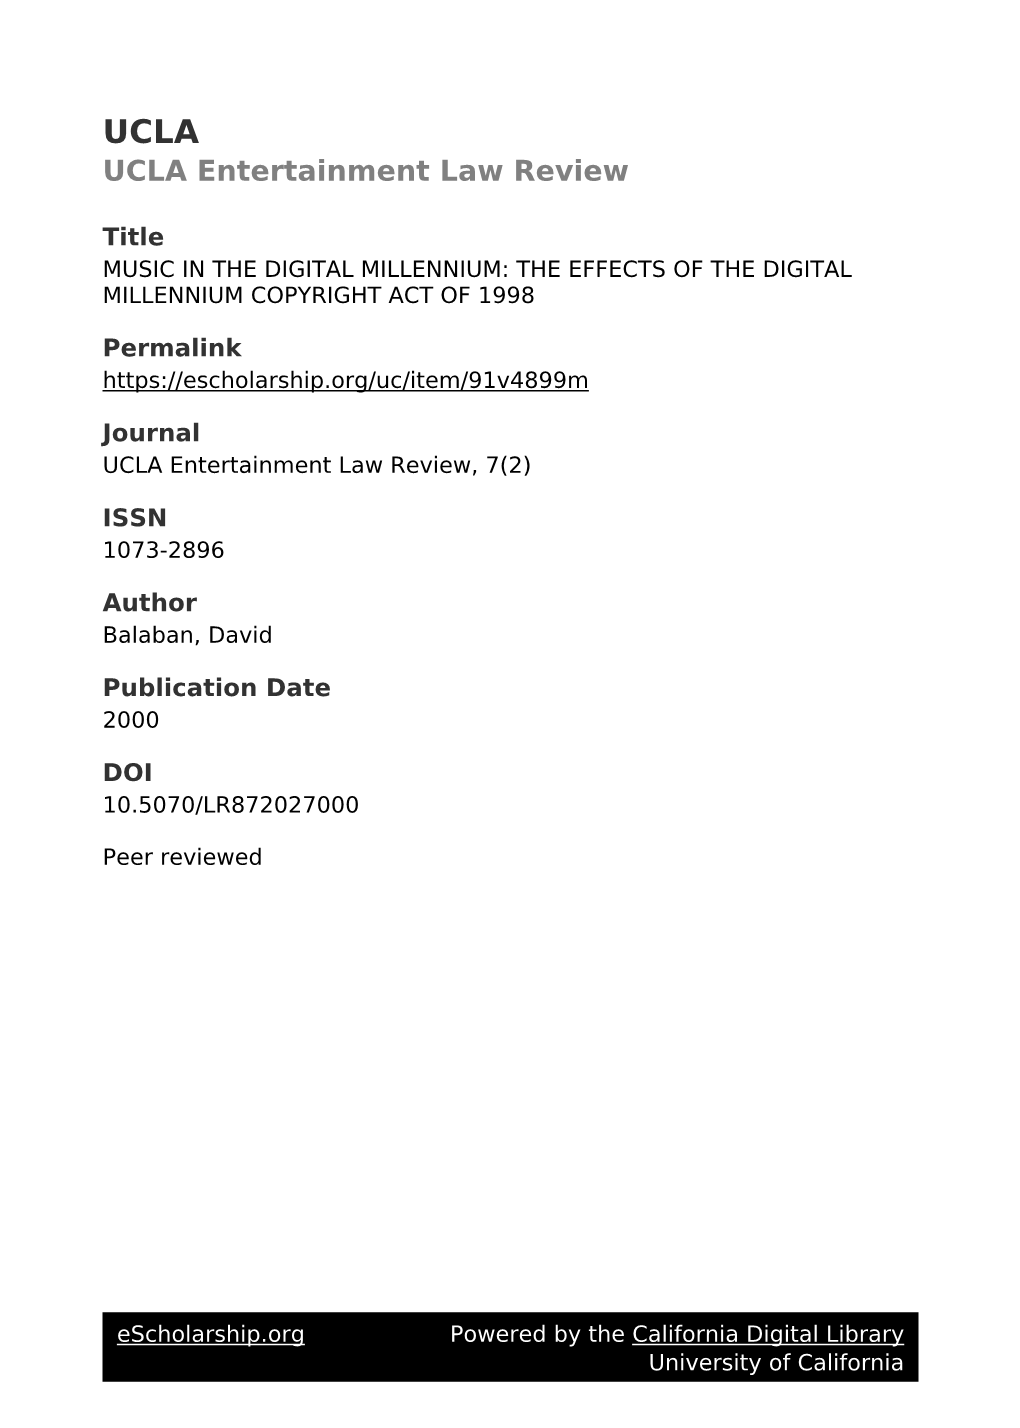 Music in the Digital Millennium: the Effects of the Digital Millennium Copyright Act of 1998